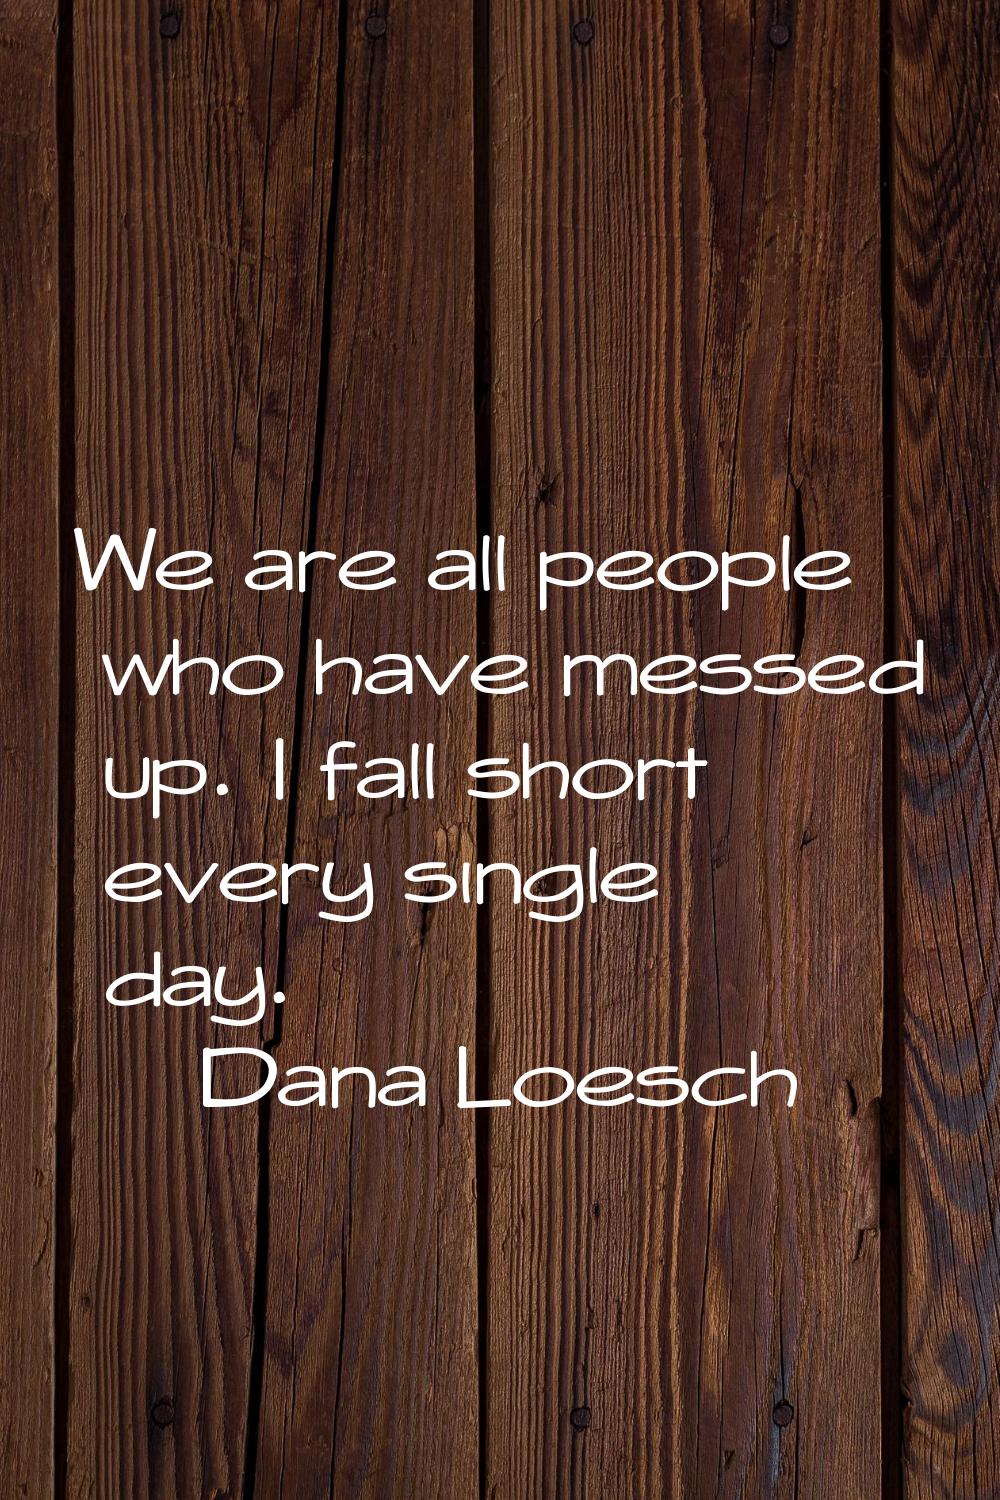 We are all people who have messed up. I fall short every single day.